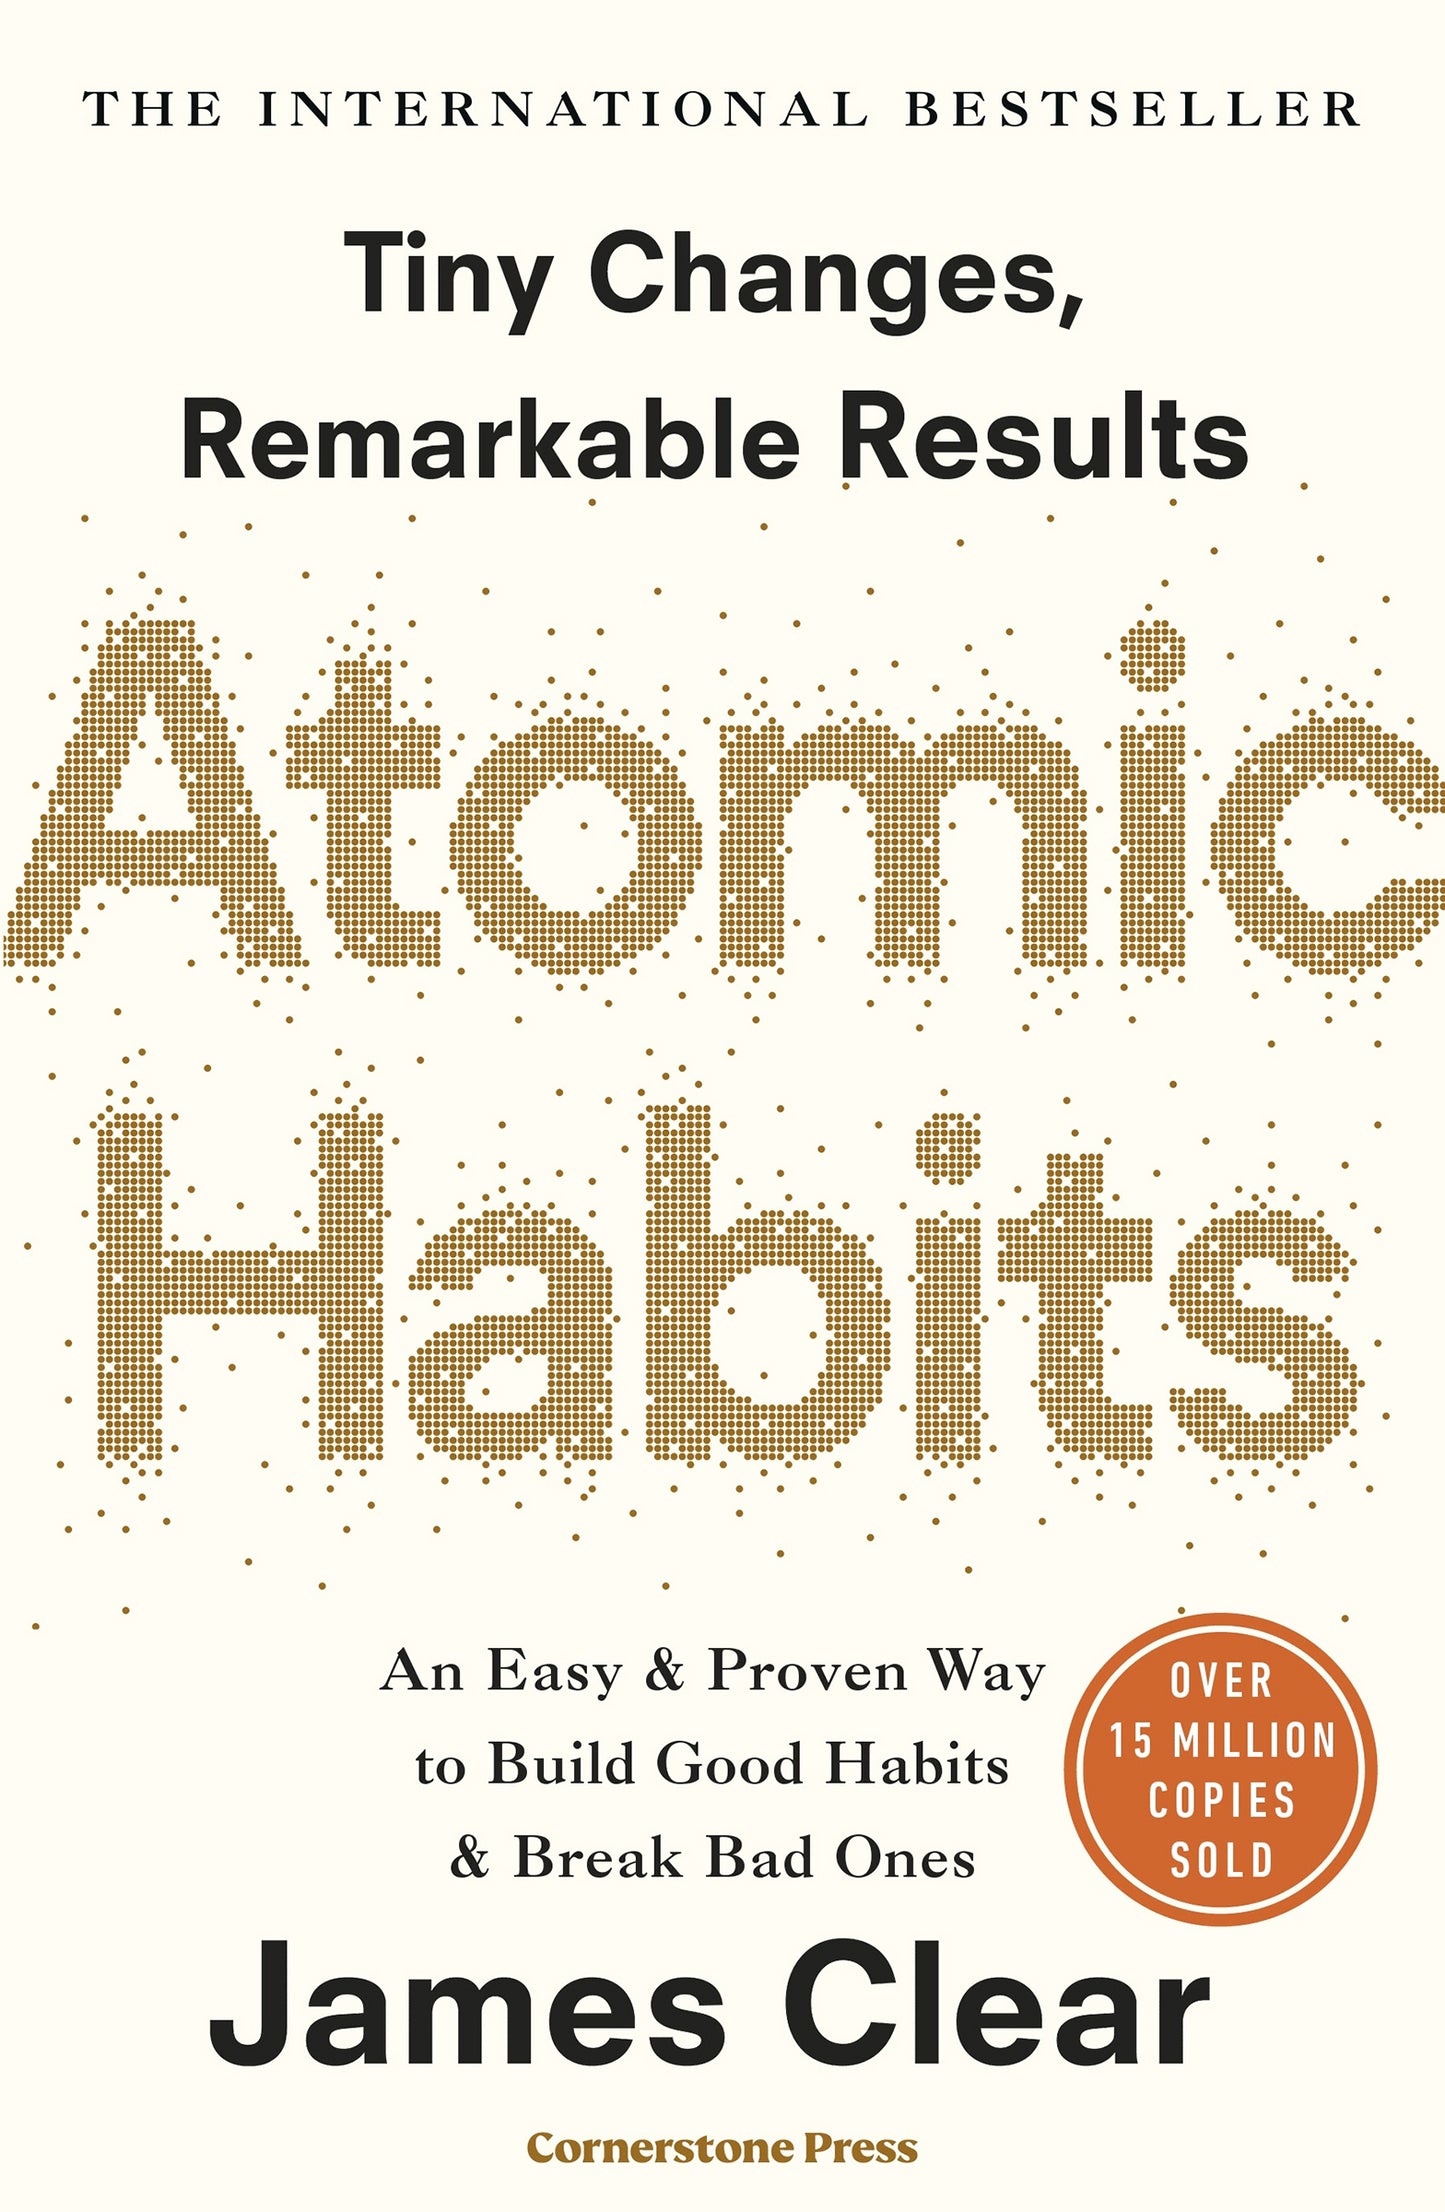 Atomic Habits - An Easy and Proven Way to Build Good Habits and Break Bad Ones